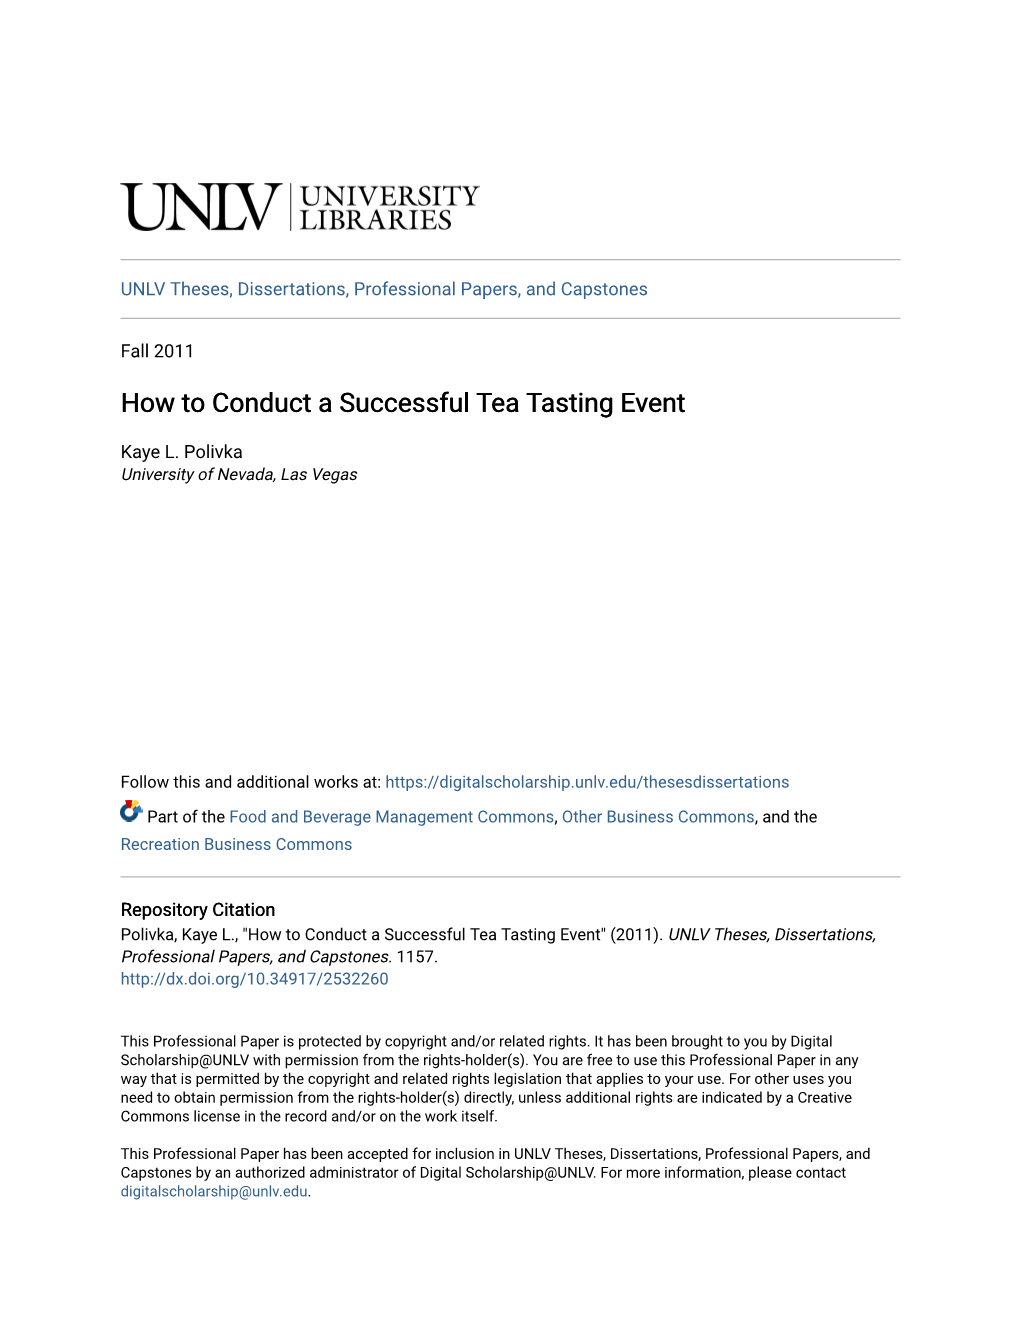 How to Conduct a Successful Tea Tasting Event